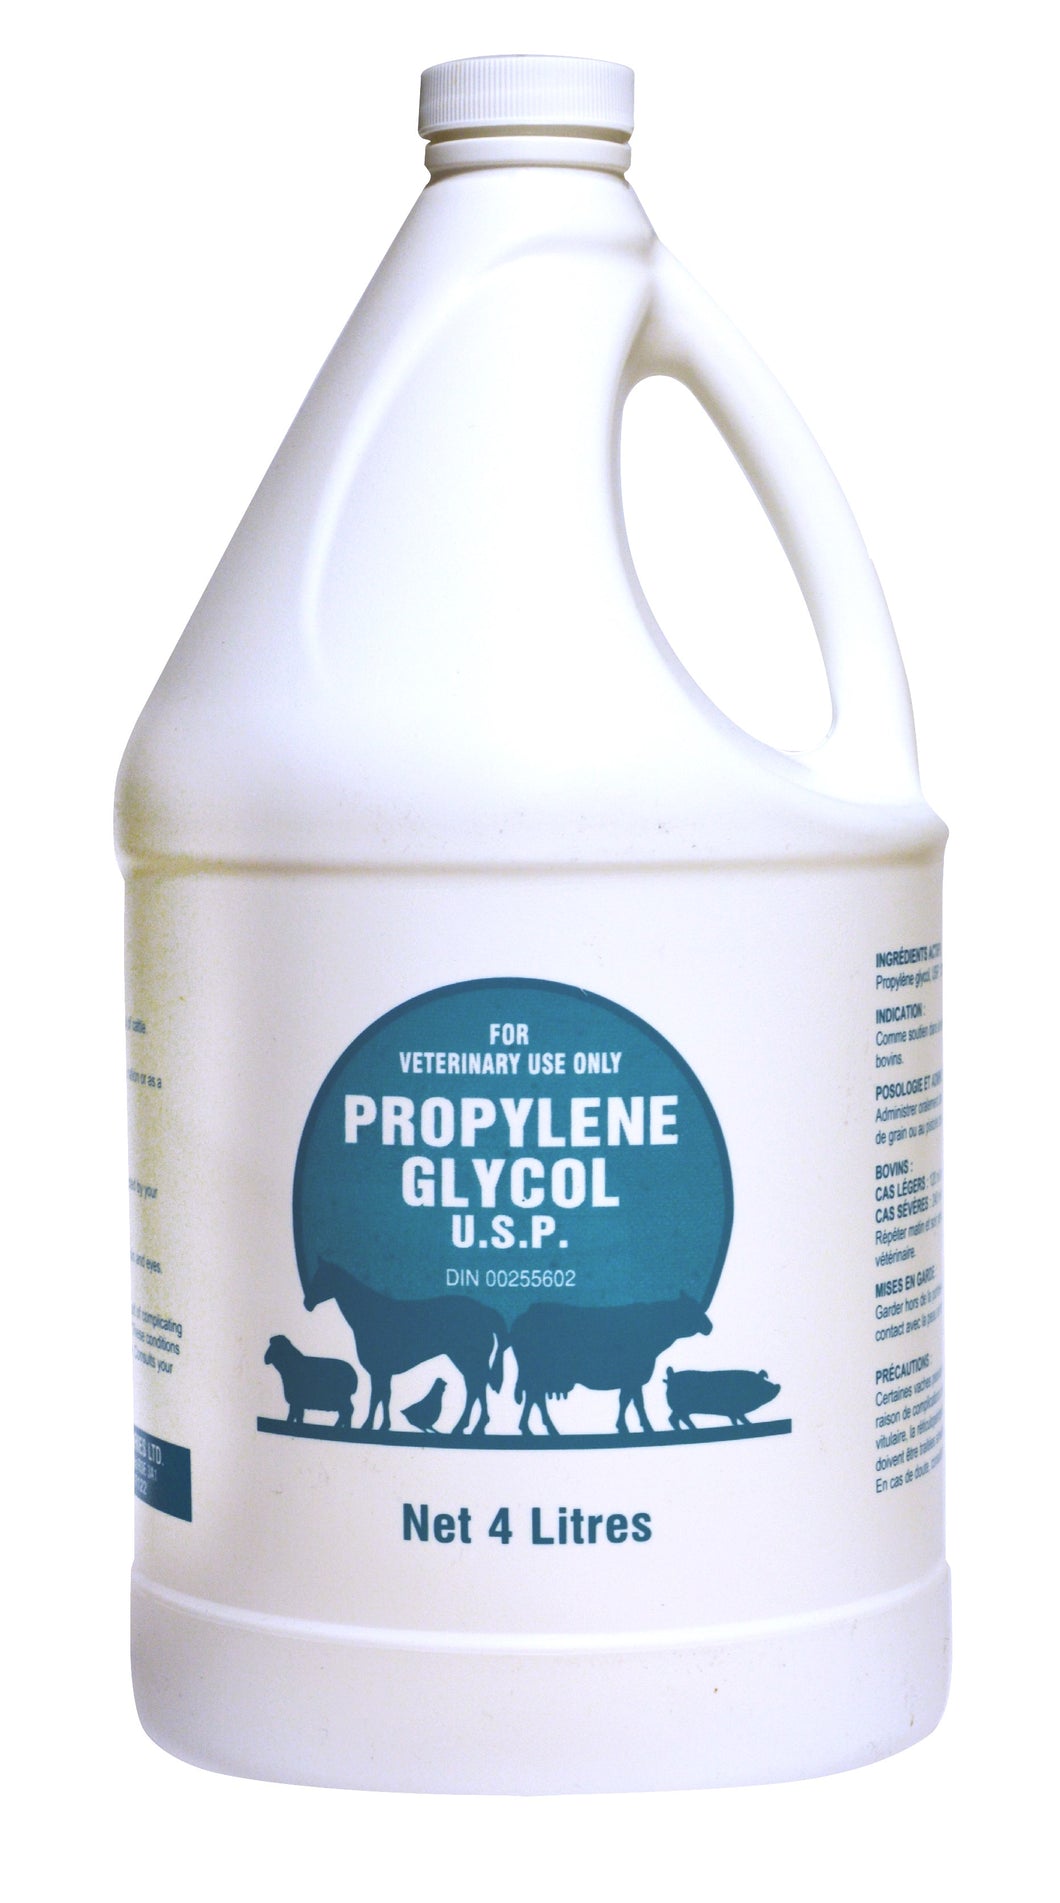 PROPYLENE GLYCOL 4L Cattle Supply treatment of acetonemia (ketosis) of cattle.